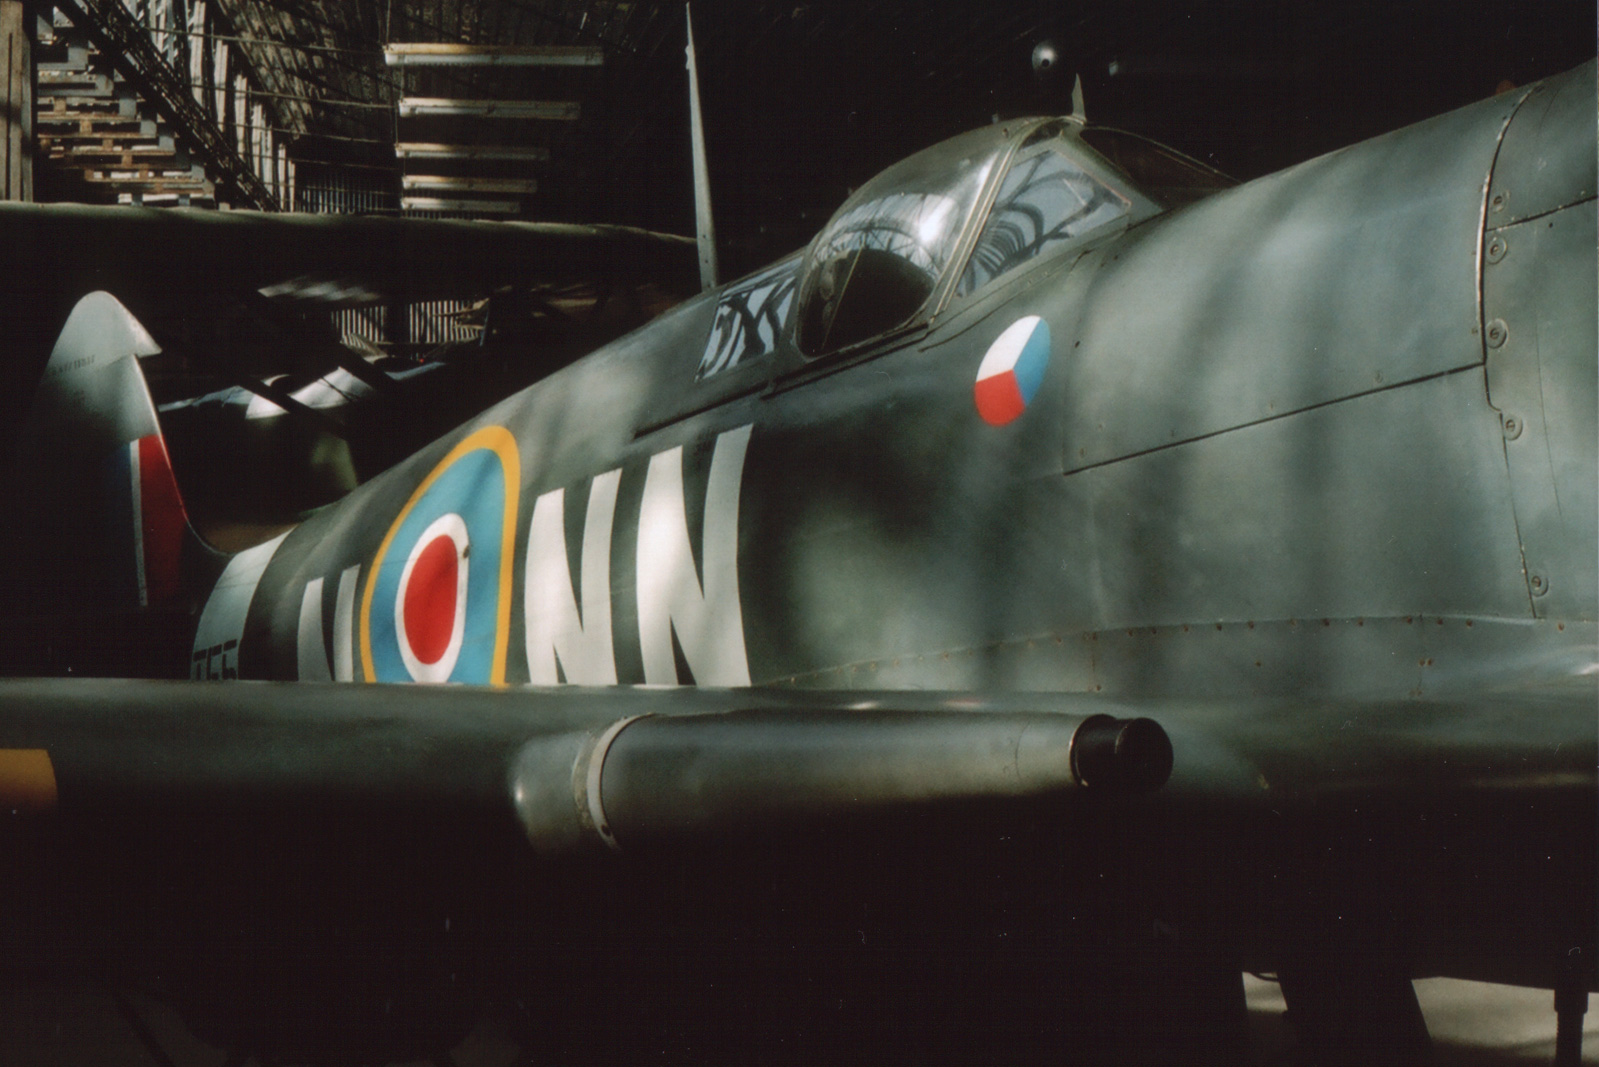 Spitfire Mk. IX fighter marked as a member of the No. 310 Squadron RAF on display at Aviation Museum Kbely, Prague, Czech Republic, 24 Aug 2006